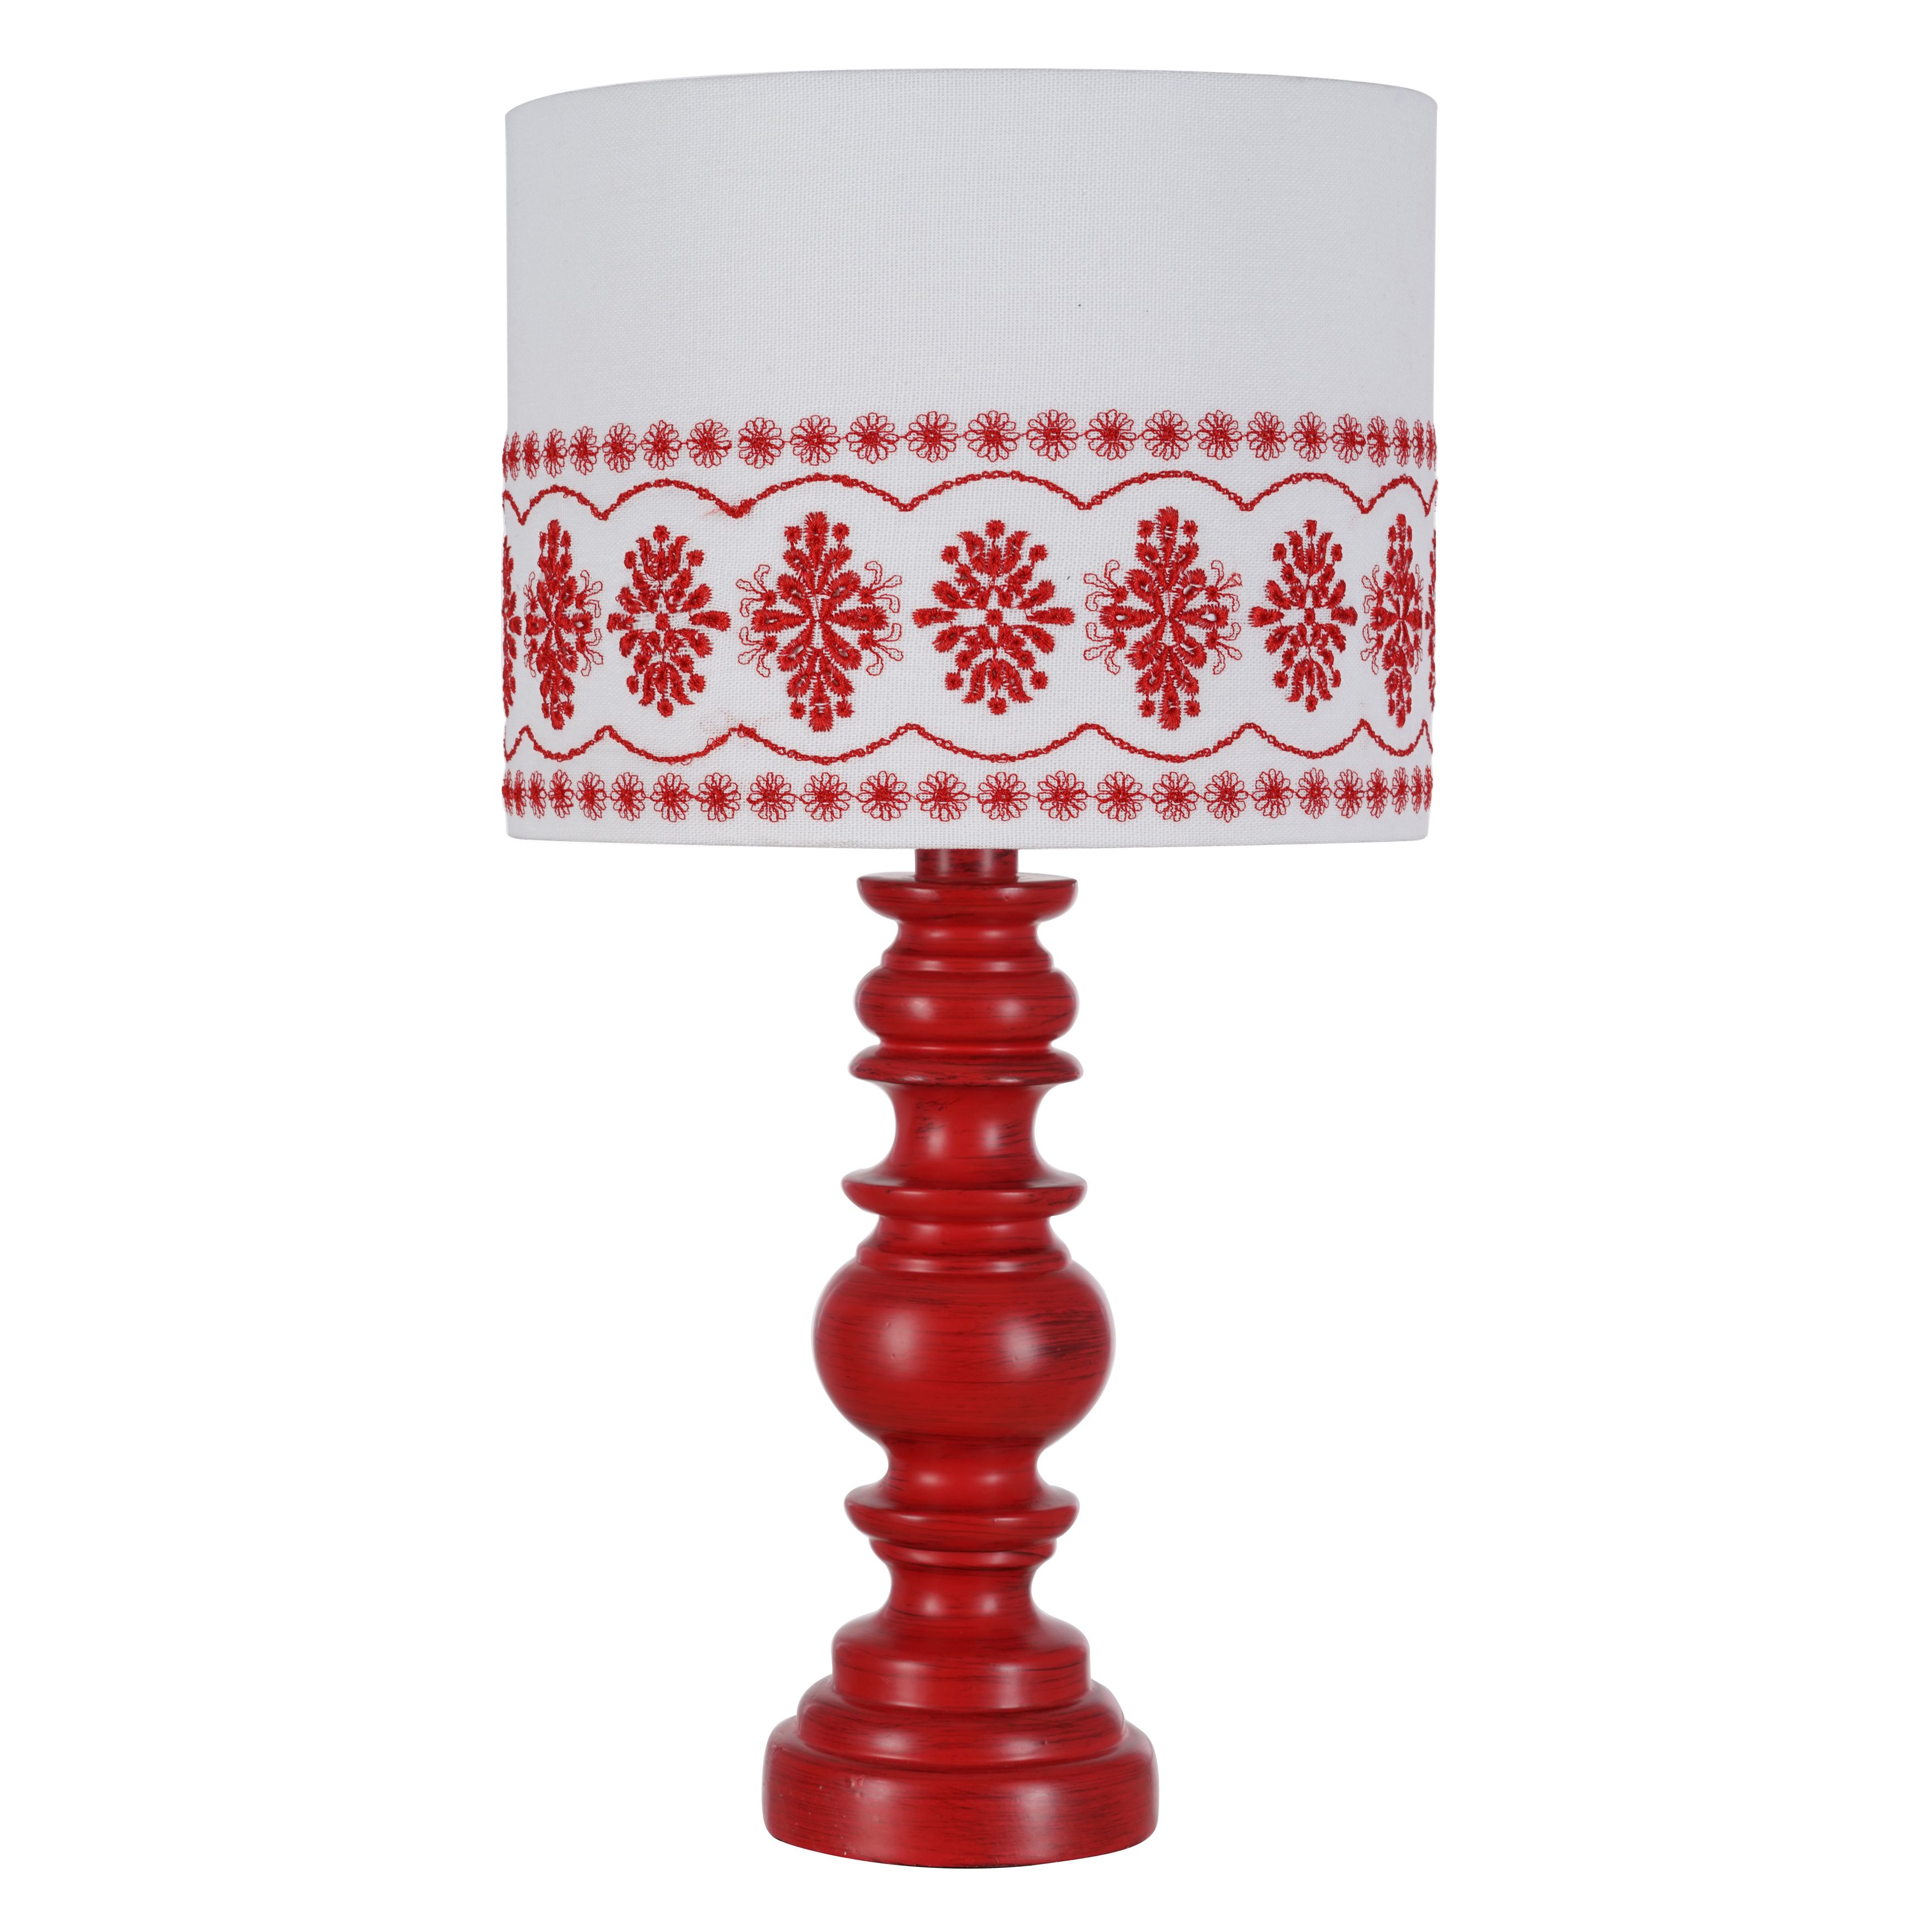 The Pioneer Woman Turned Table Lamp with White Eyelet Linen Shade